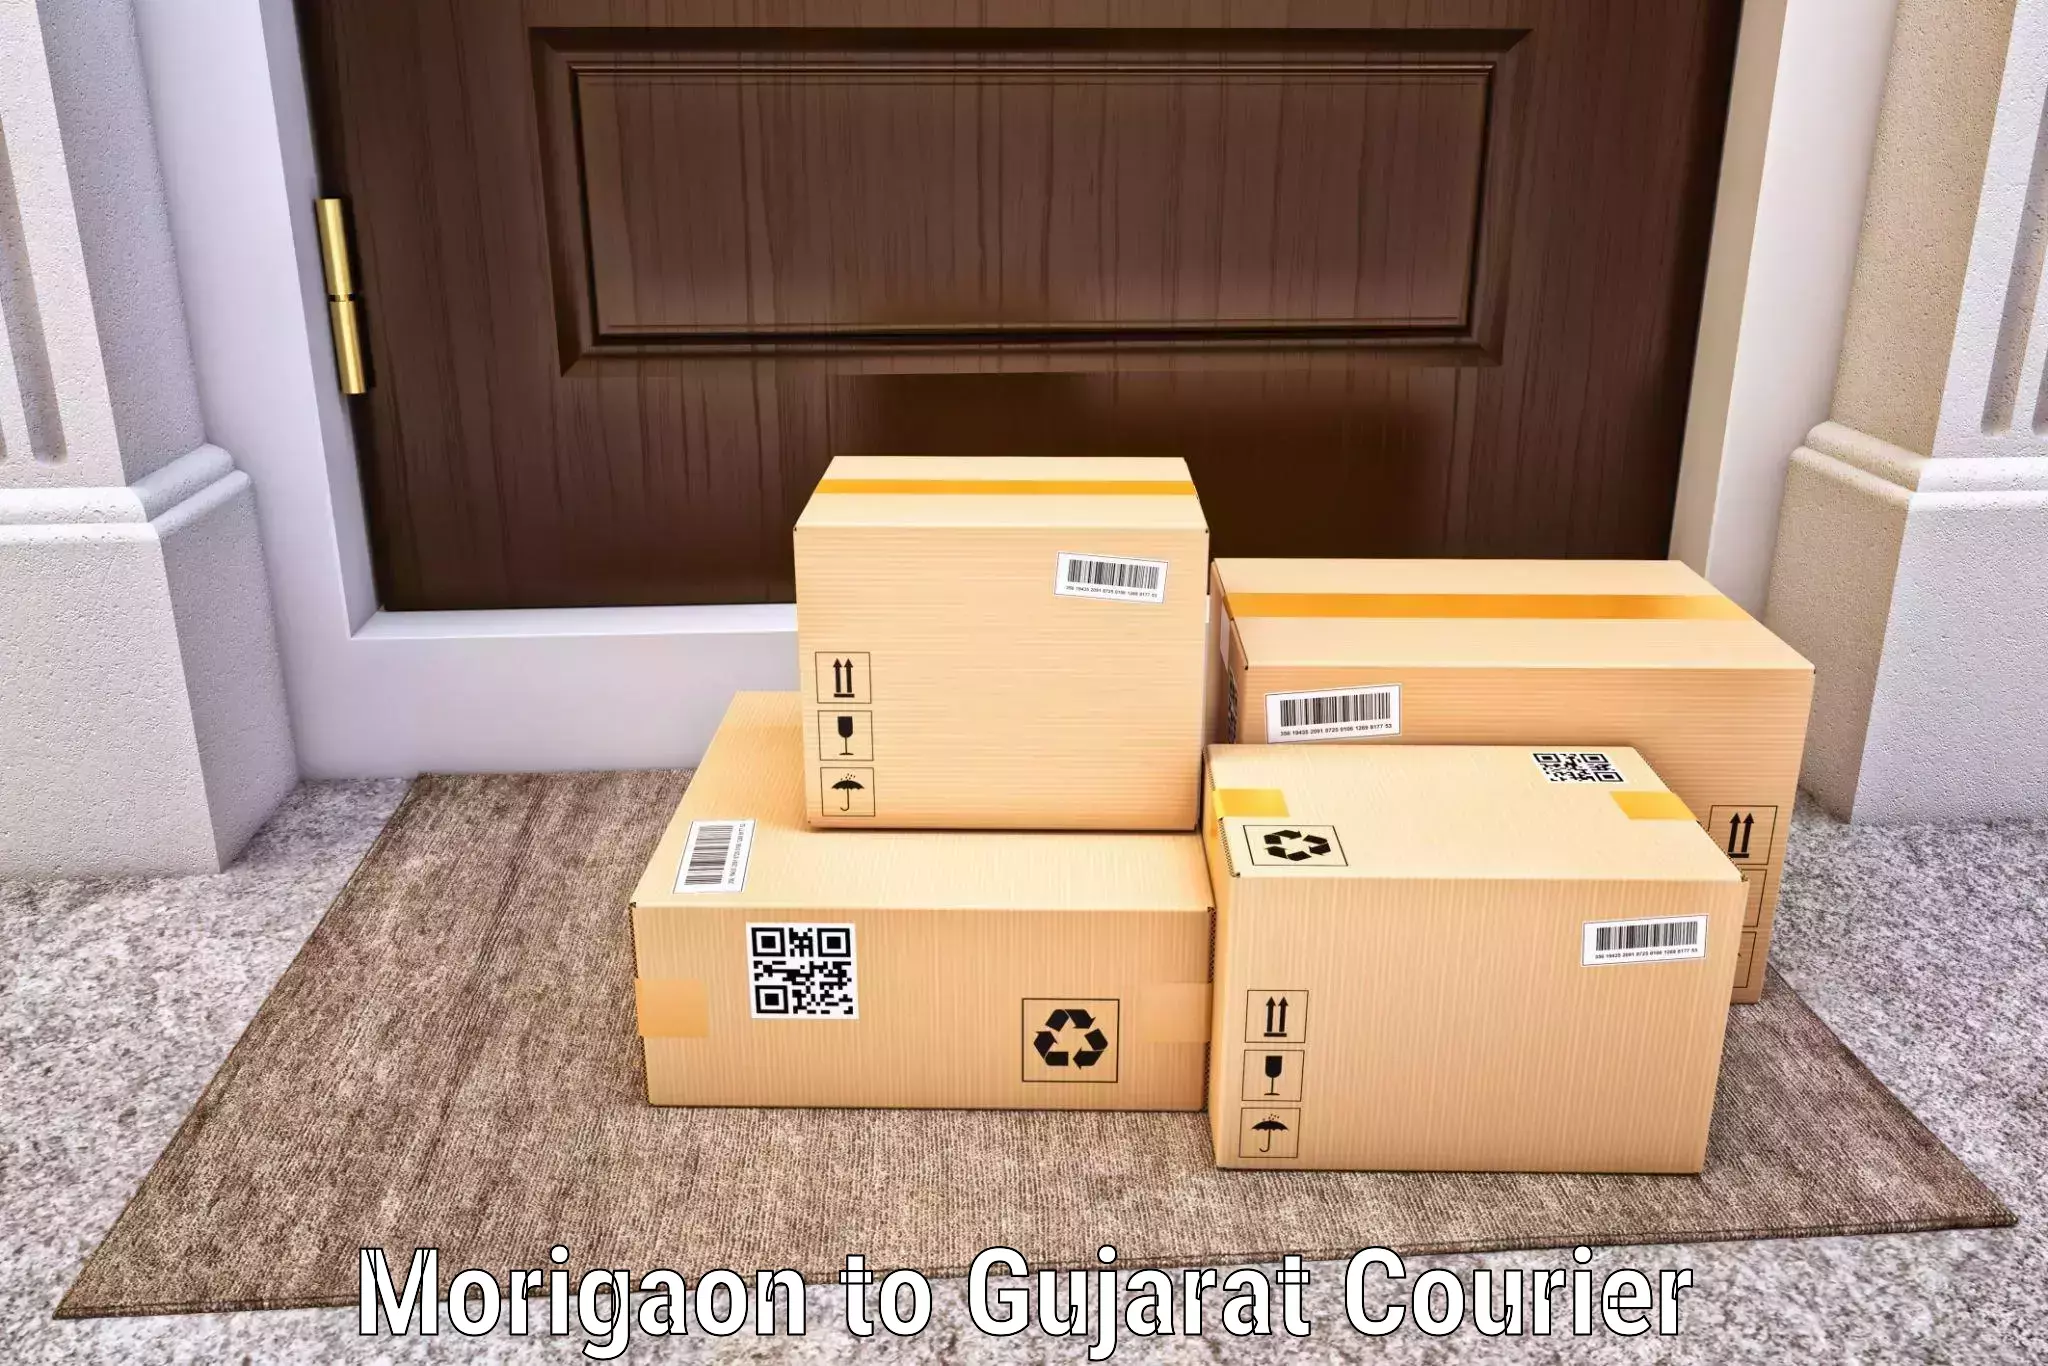 24-hour delivery options in Morigaon to Gujarat